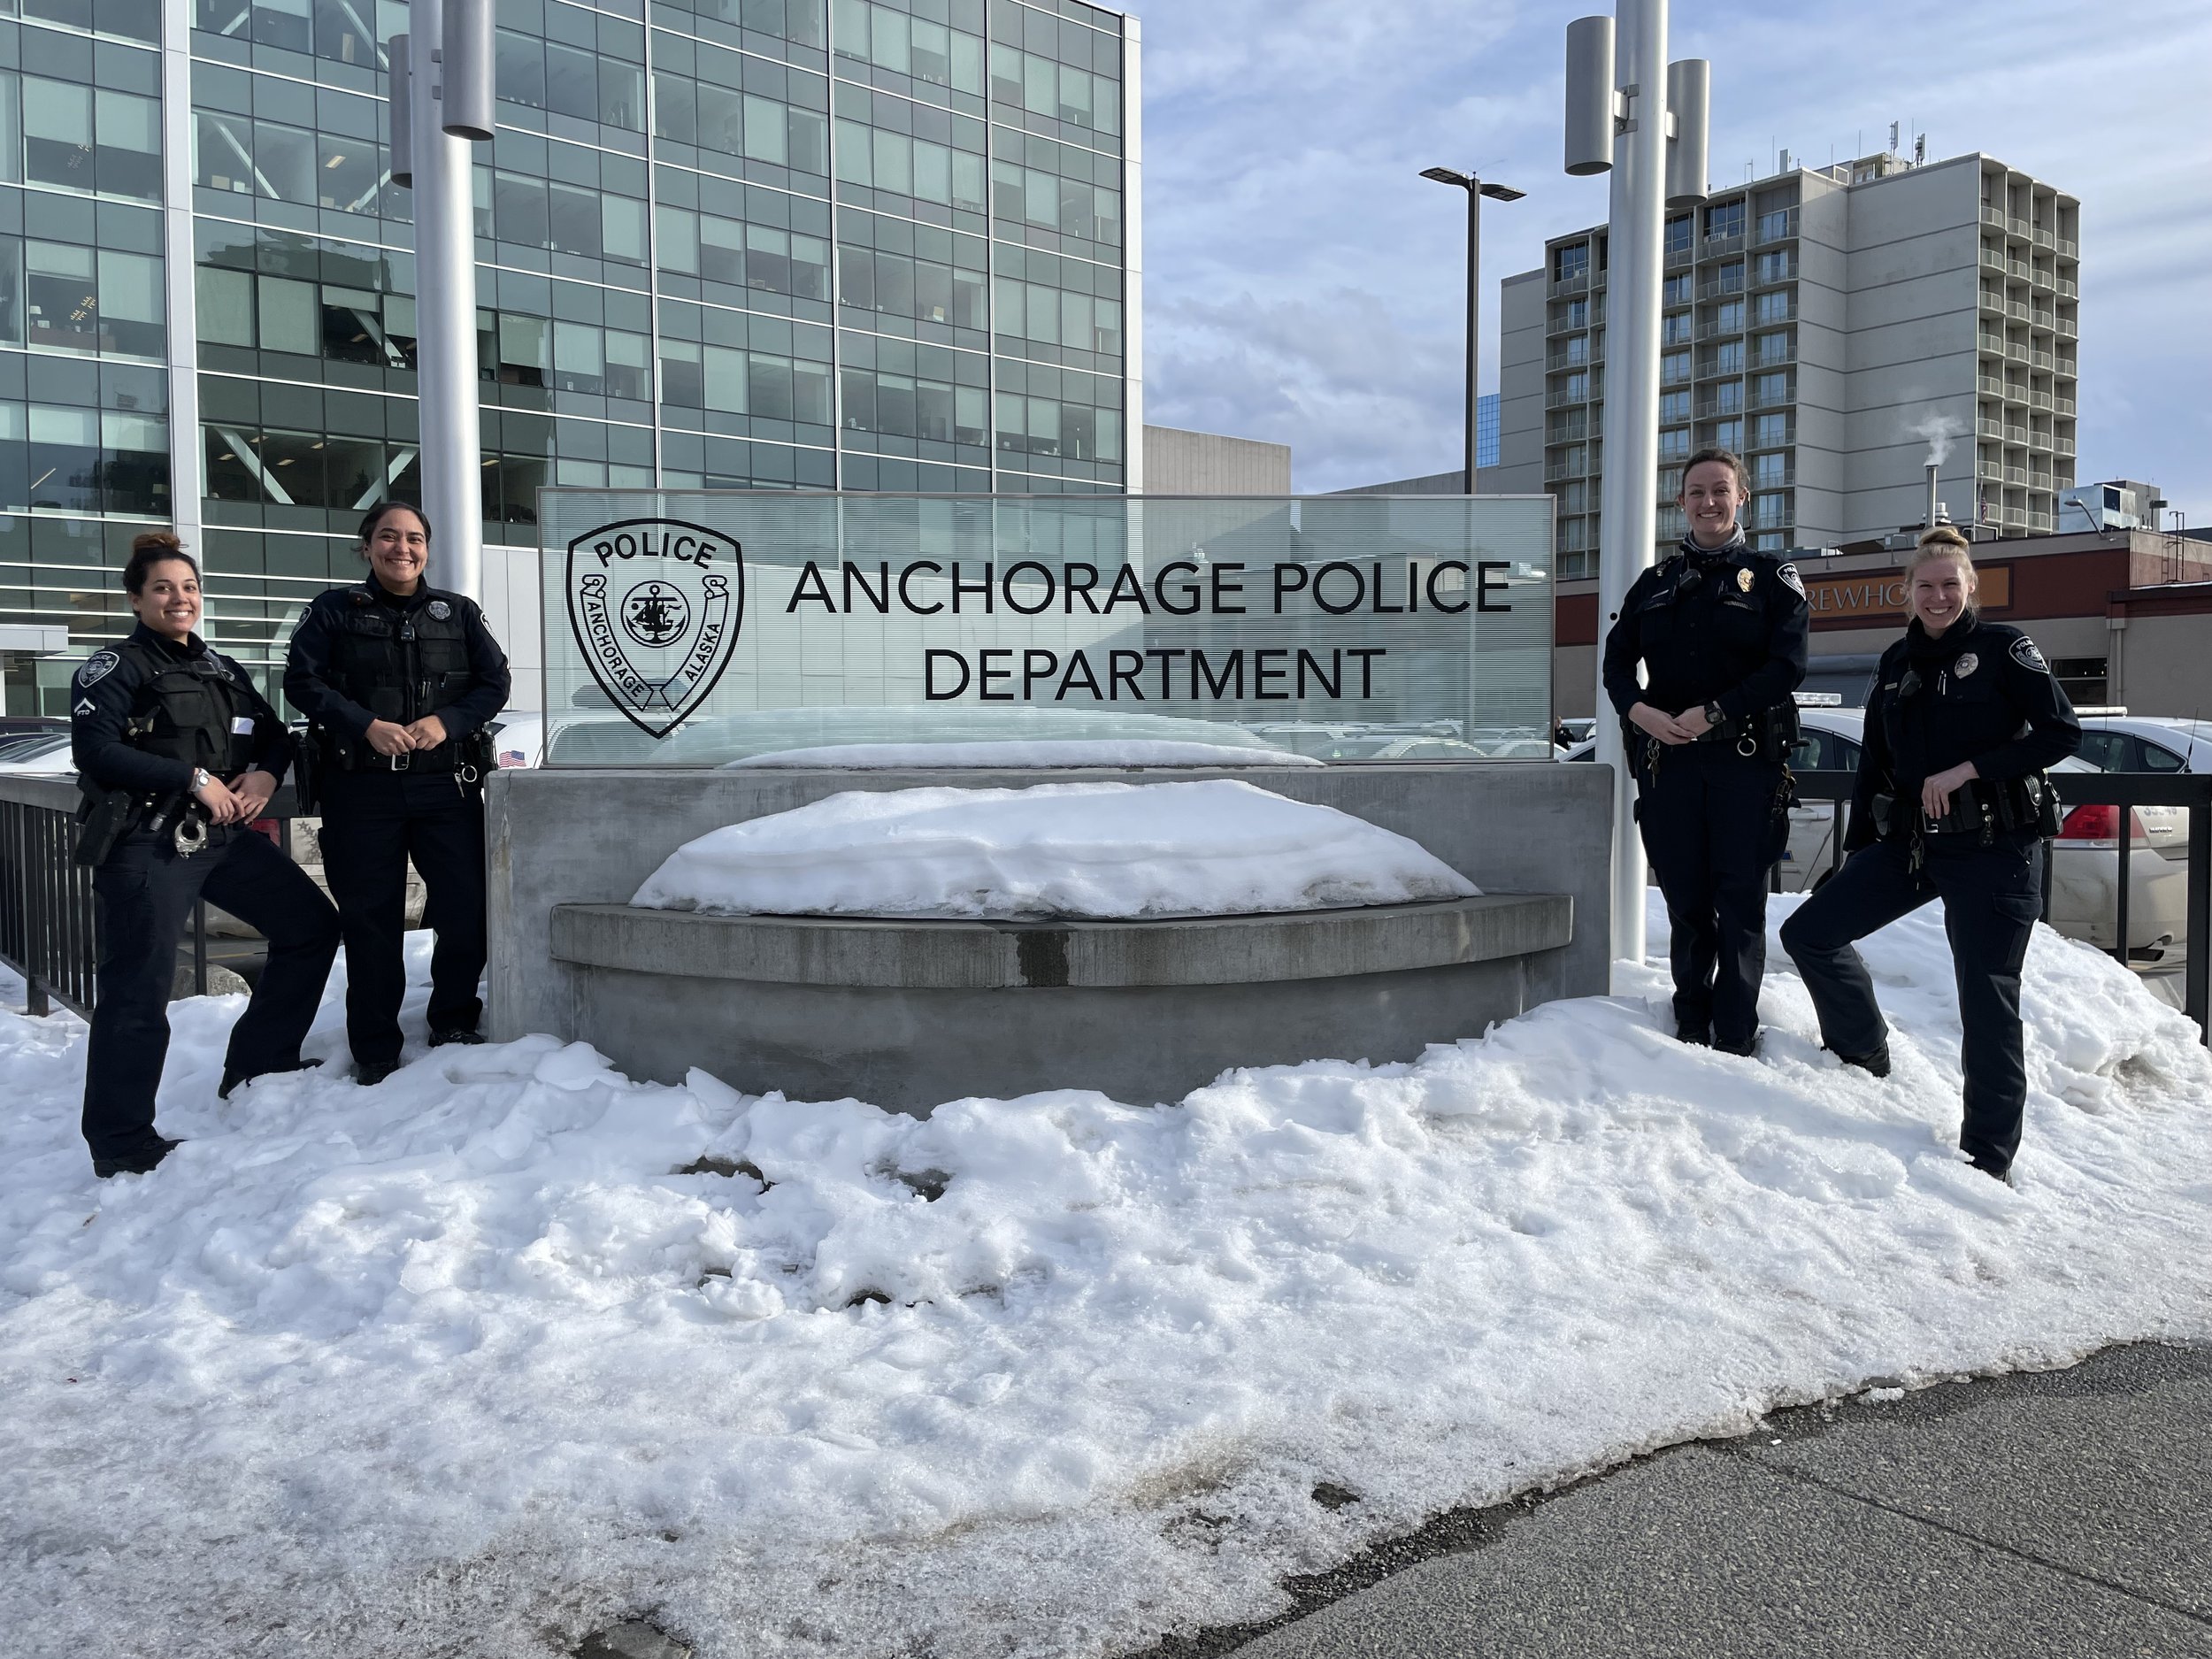 Image of Anchorage Police Department